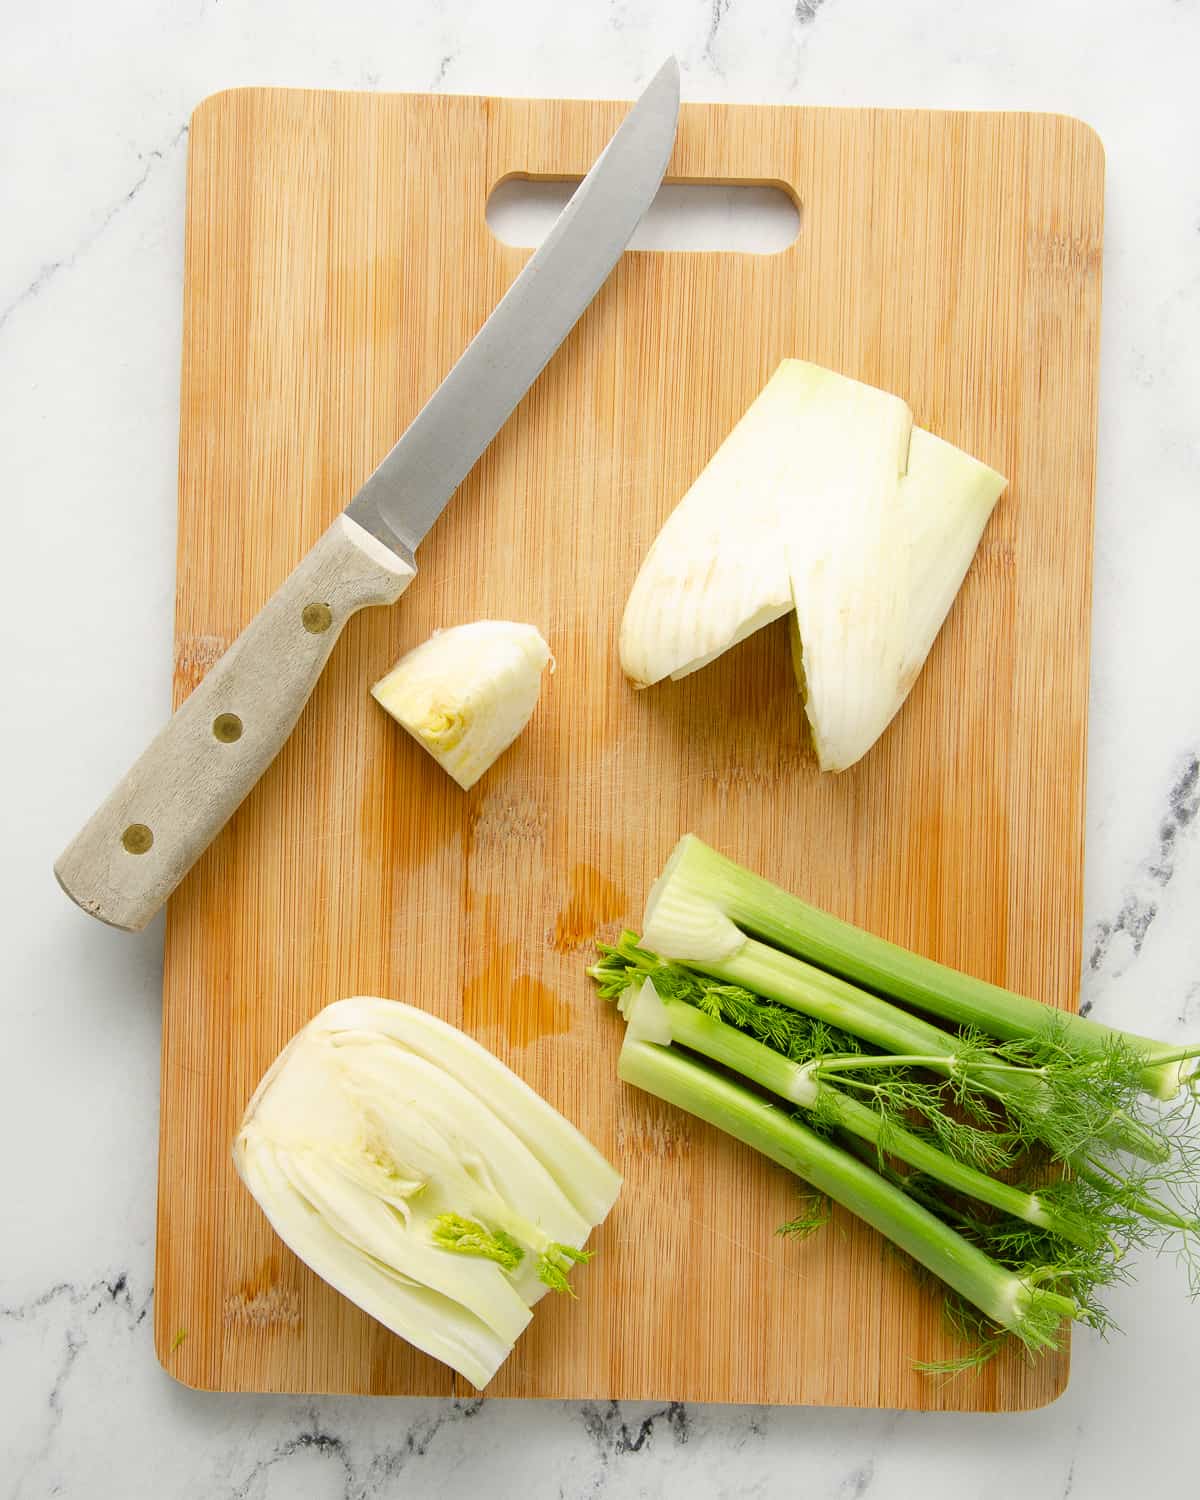 A cutting board with cut fennel and a knife.